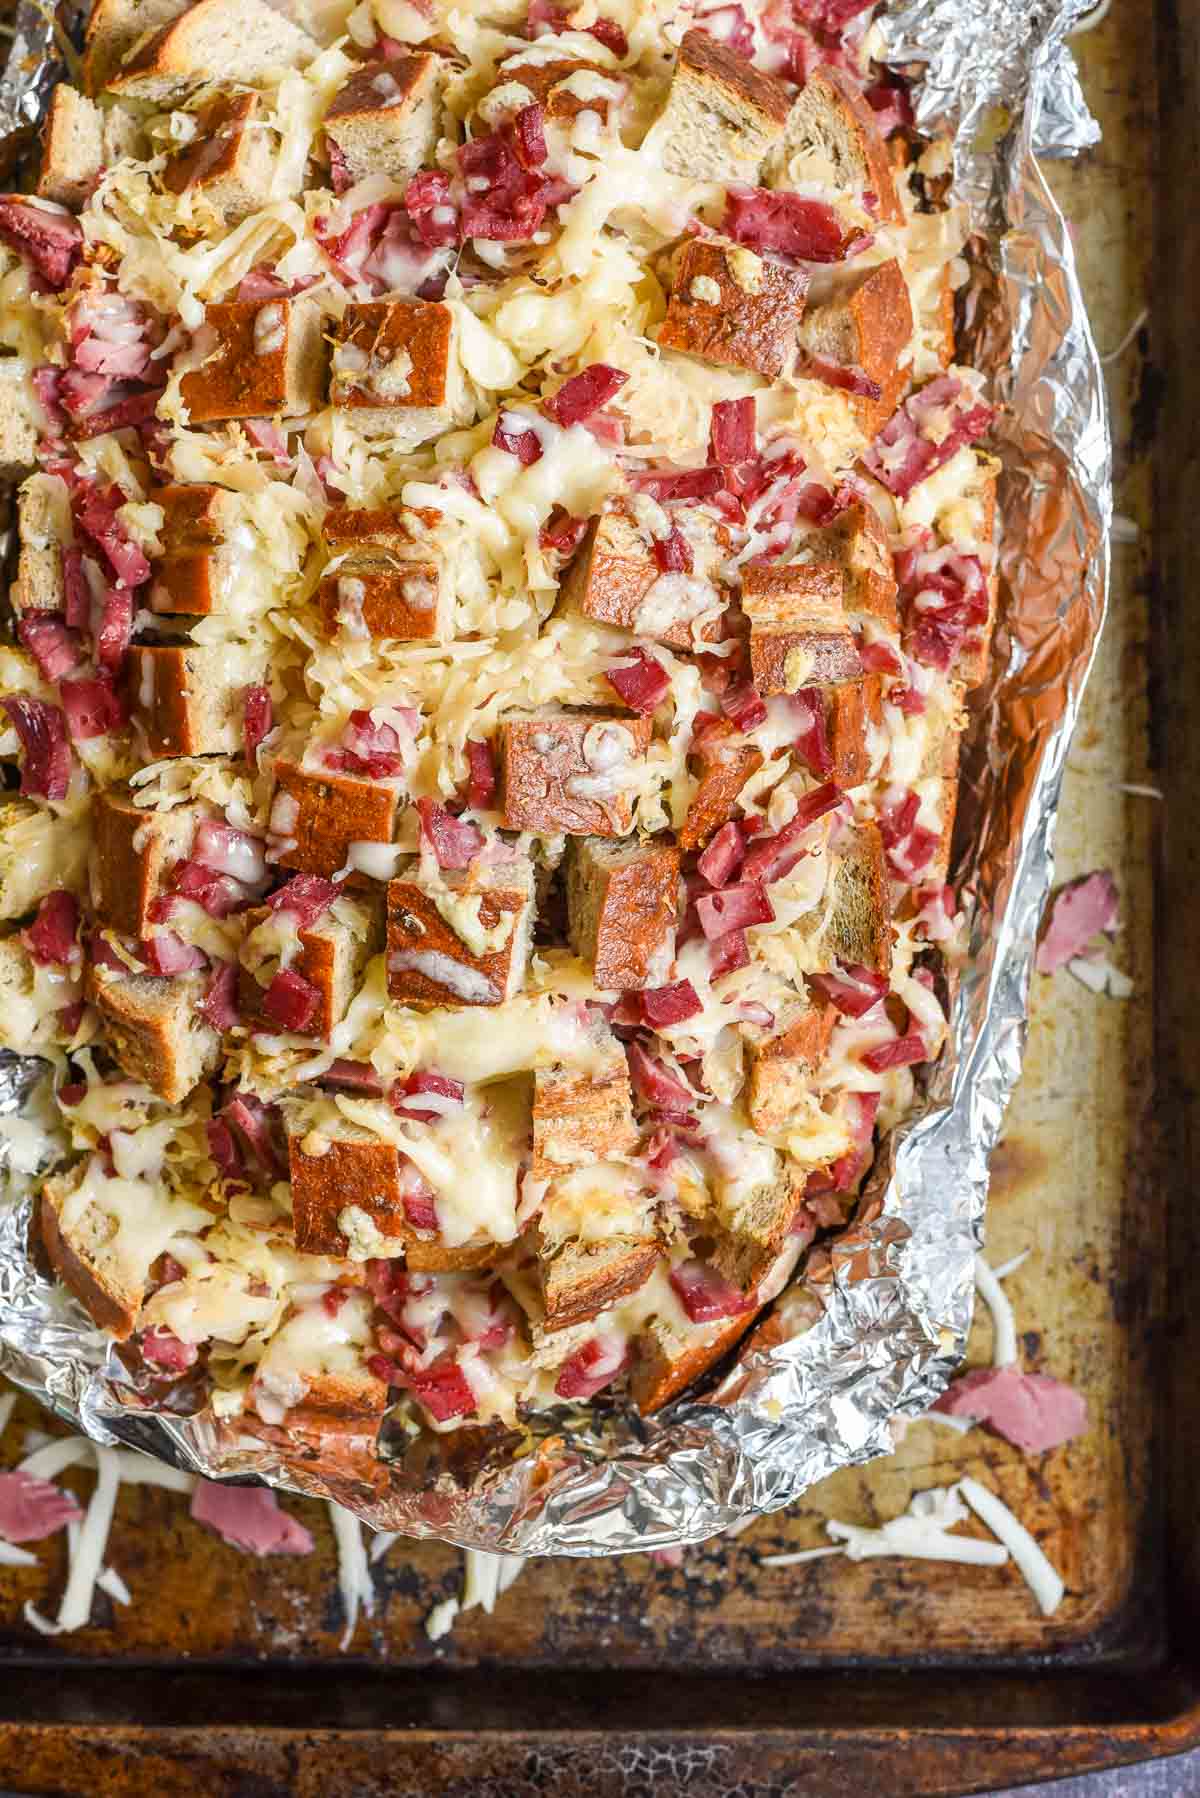 This Pull Apart Reuben bread is an easy appetizer everyone will love!